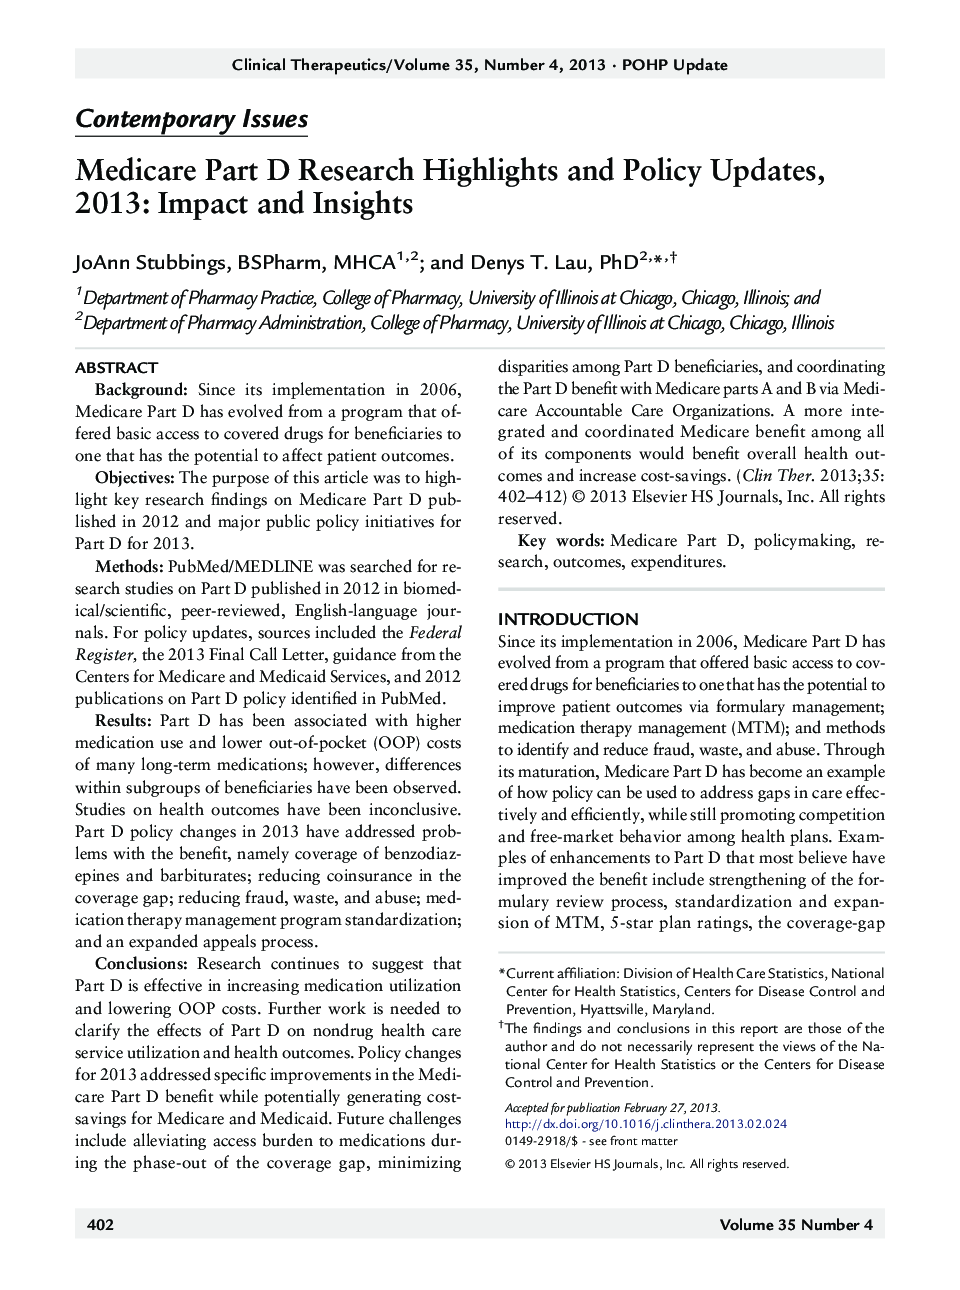 Medicare Part D Research Highlights and Policy Updates, 2013: Impact and Insights